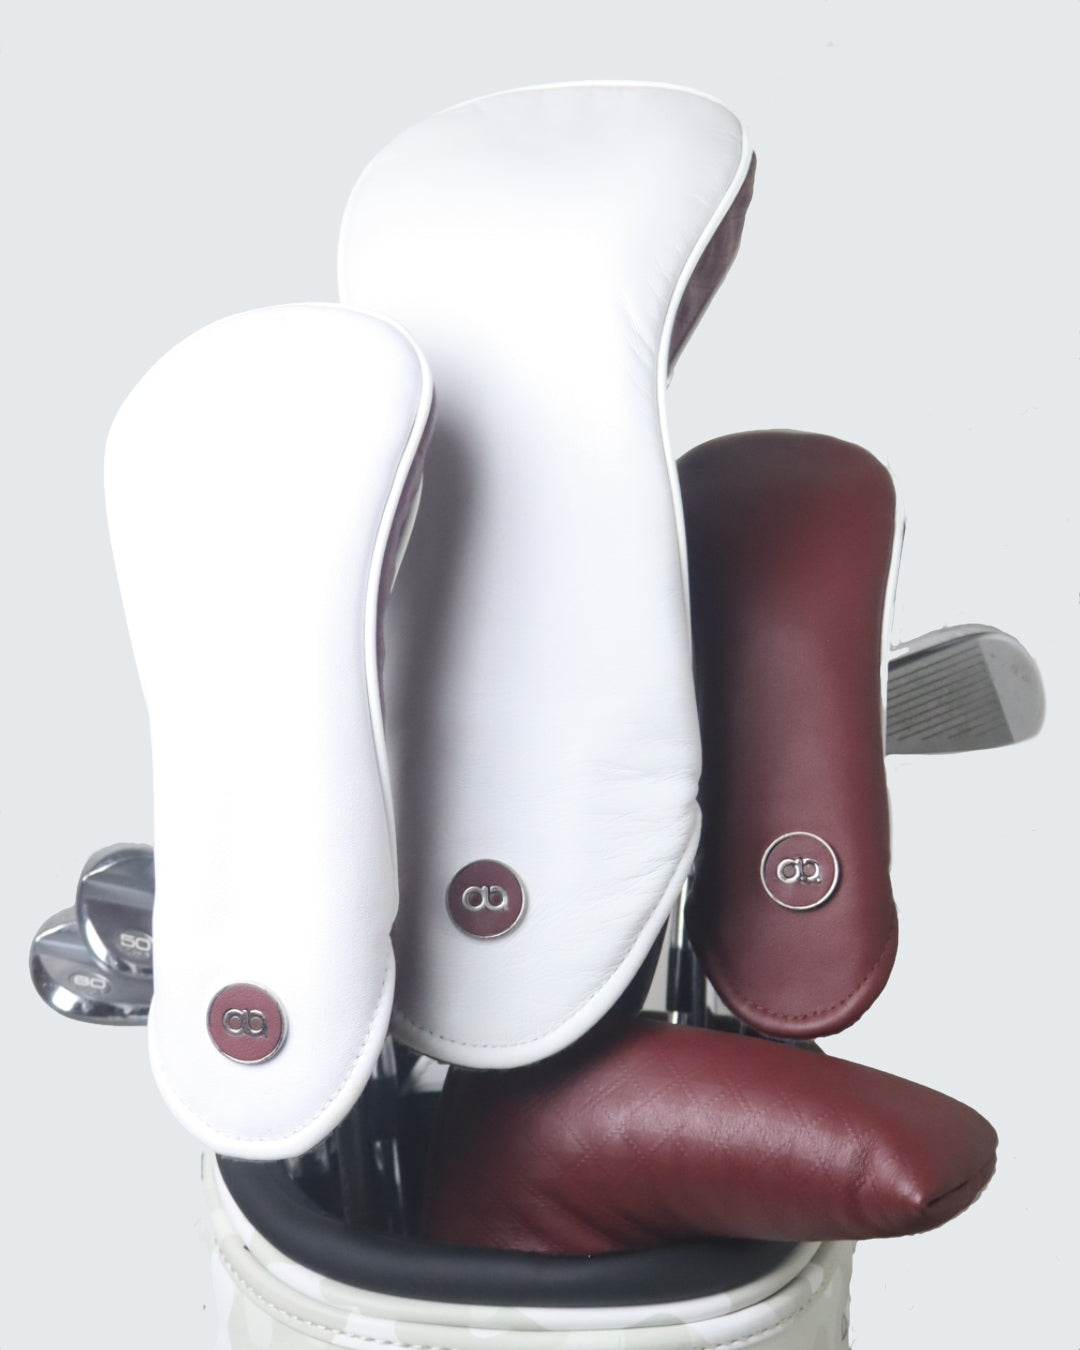 Set of white and burgundy leather fairway wood headcover by David Alexander